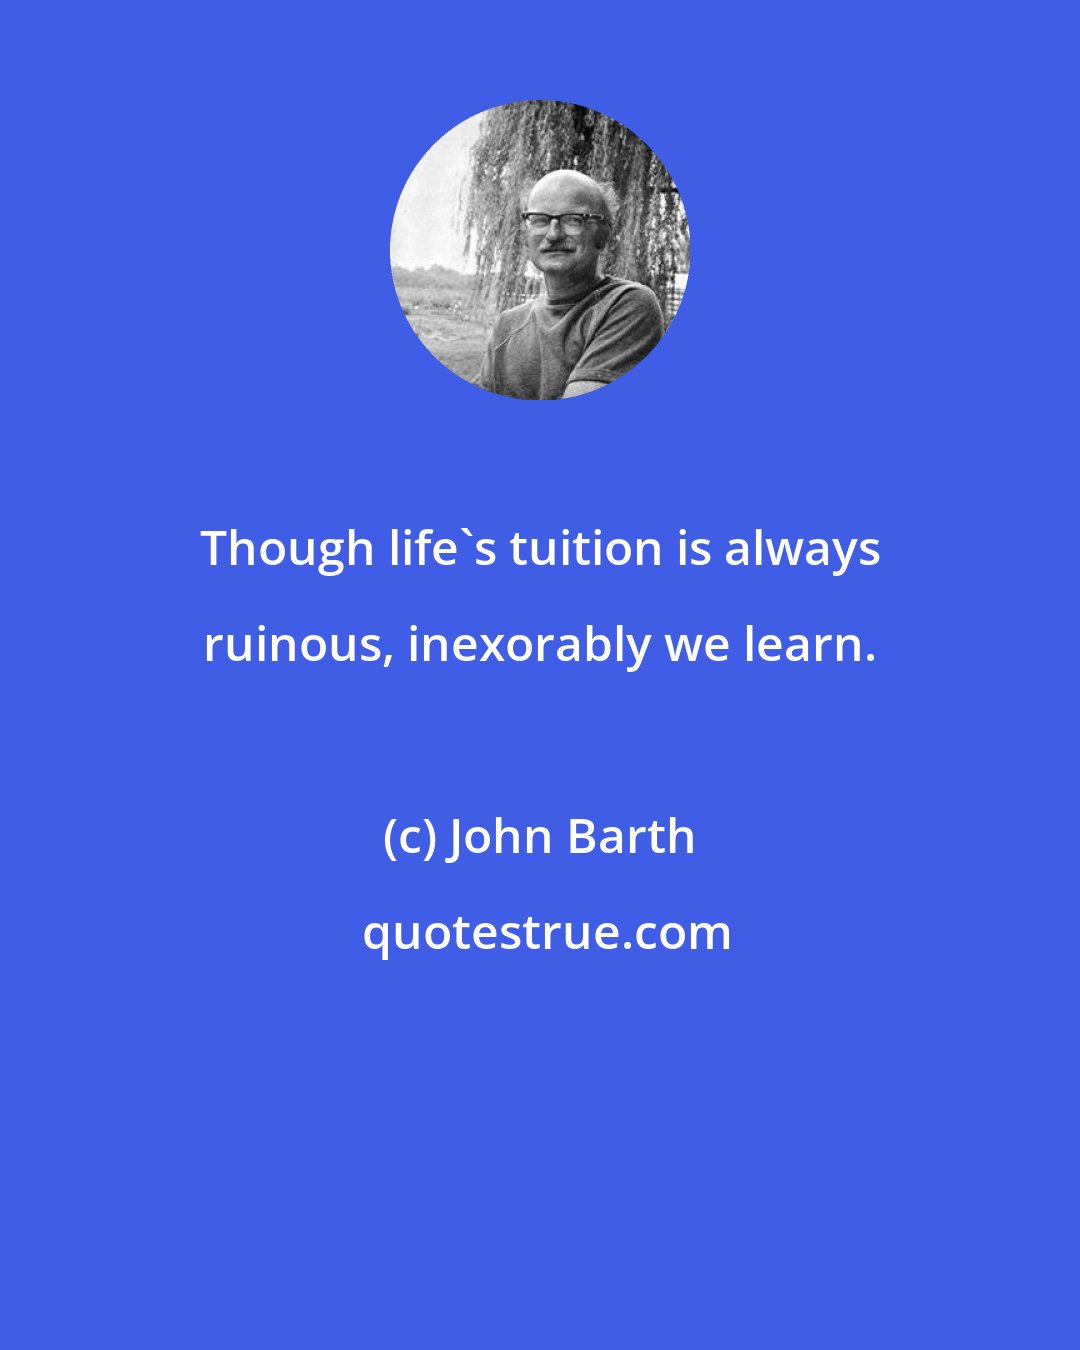 John Barth: Though life's tuition is always ruinous, inexorably we learn.